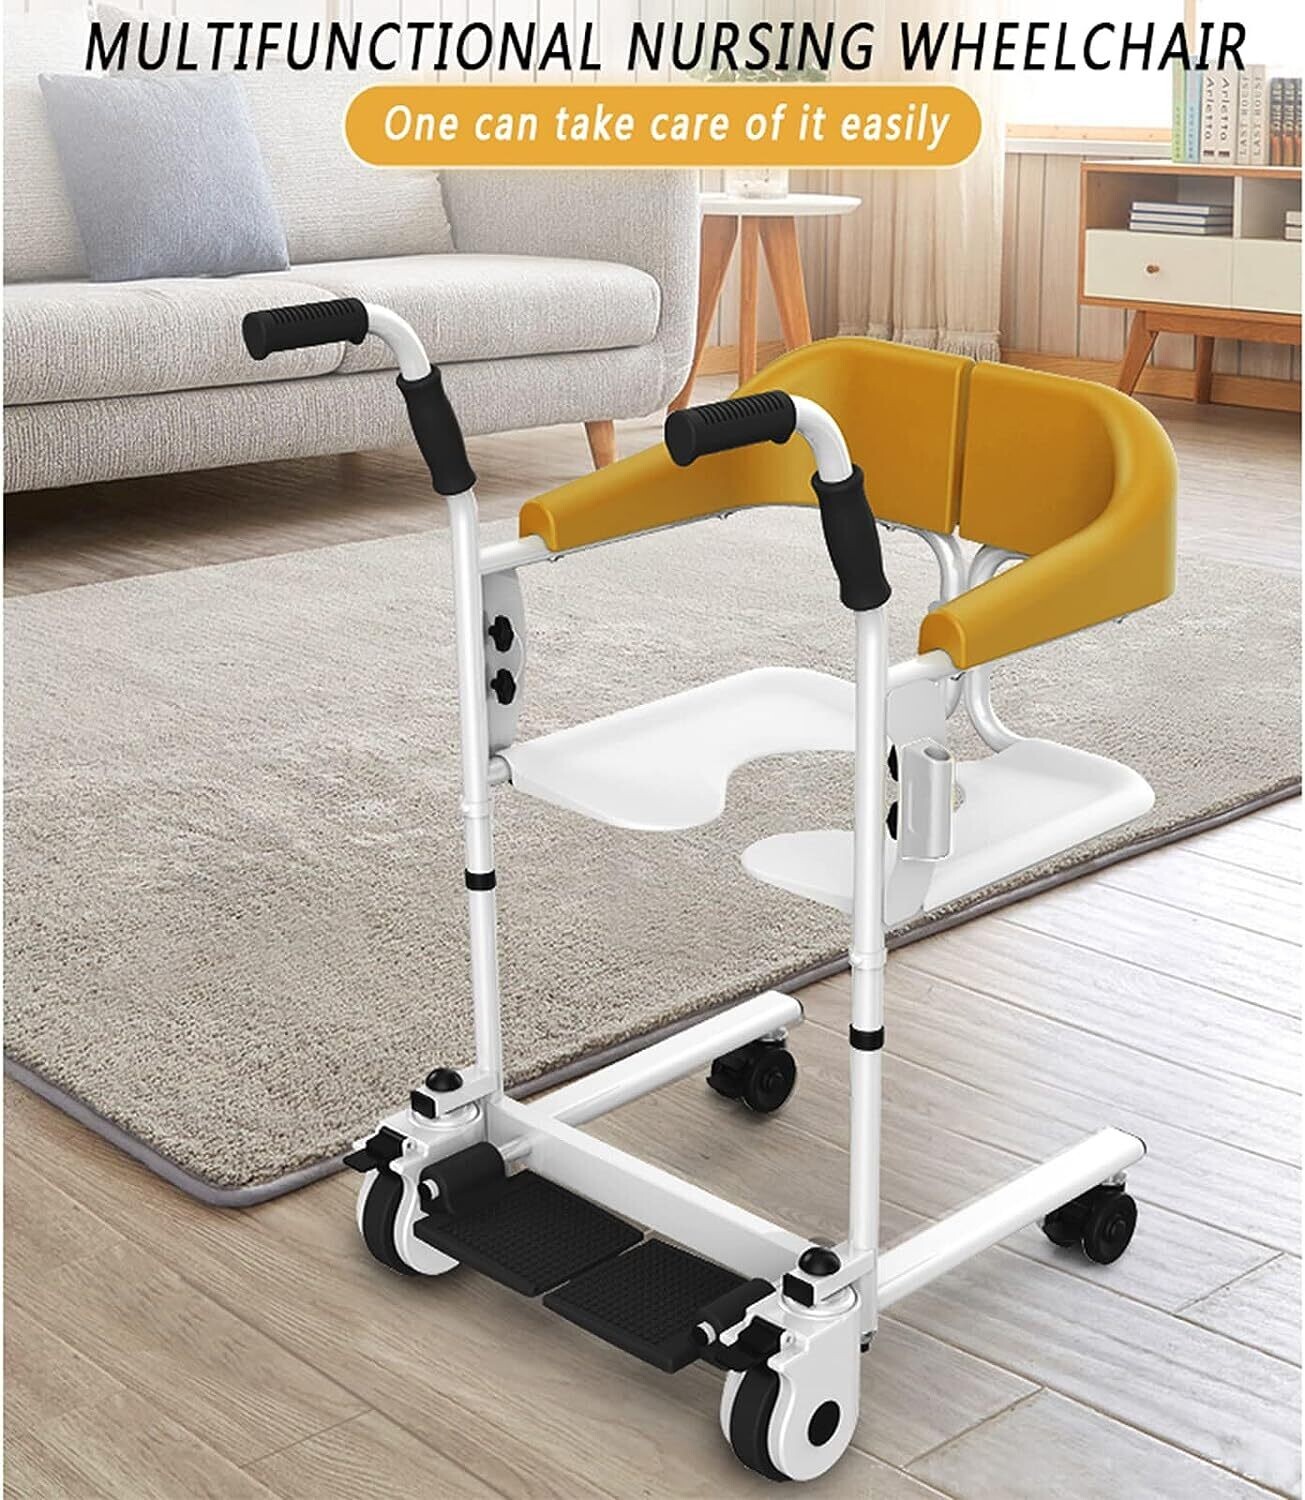 Patient Lift Wheelchair Portable Patient Transport Lift With 180° Split Seat, Shower Chair Toilet Chair With Bedpan,